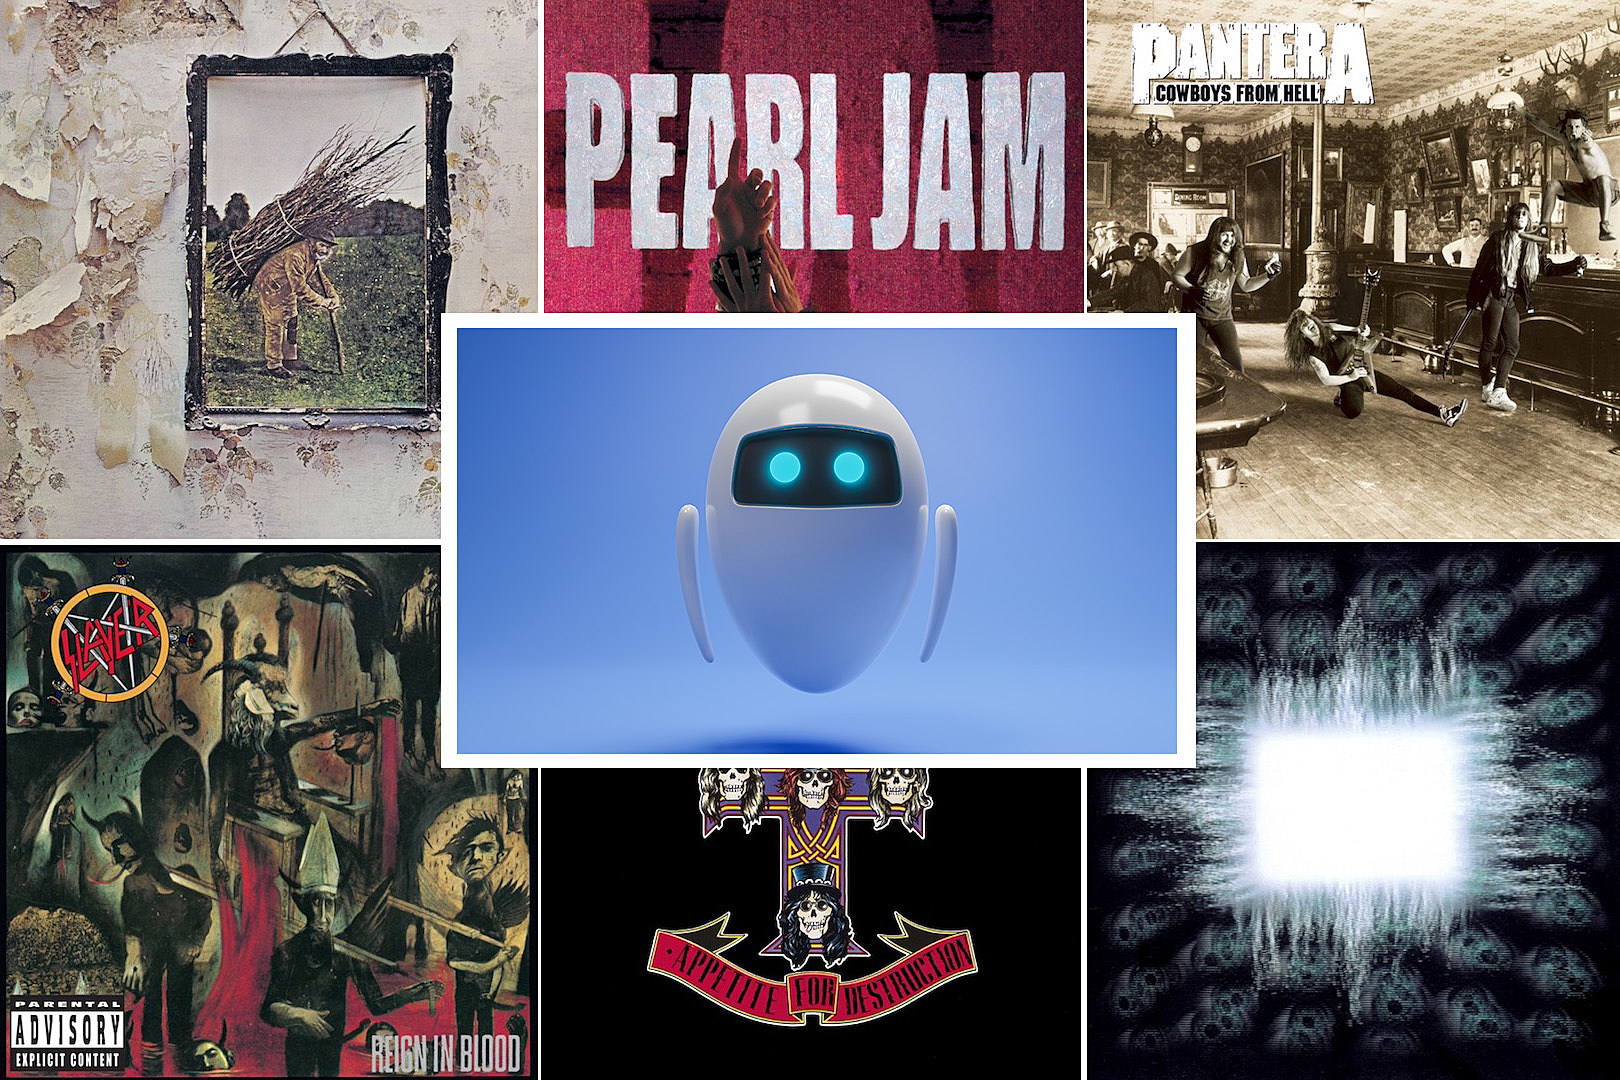 We Asked an AI Chatbot Why 20 Classic Albums Are So Great